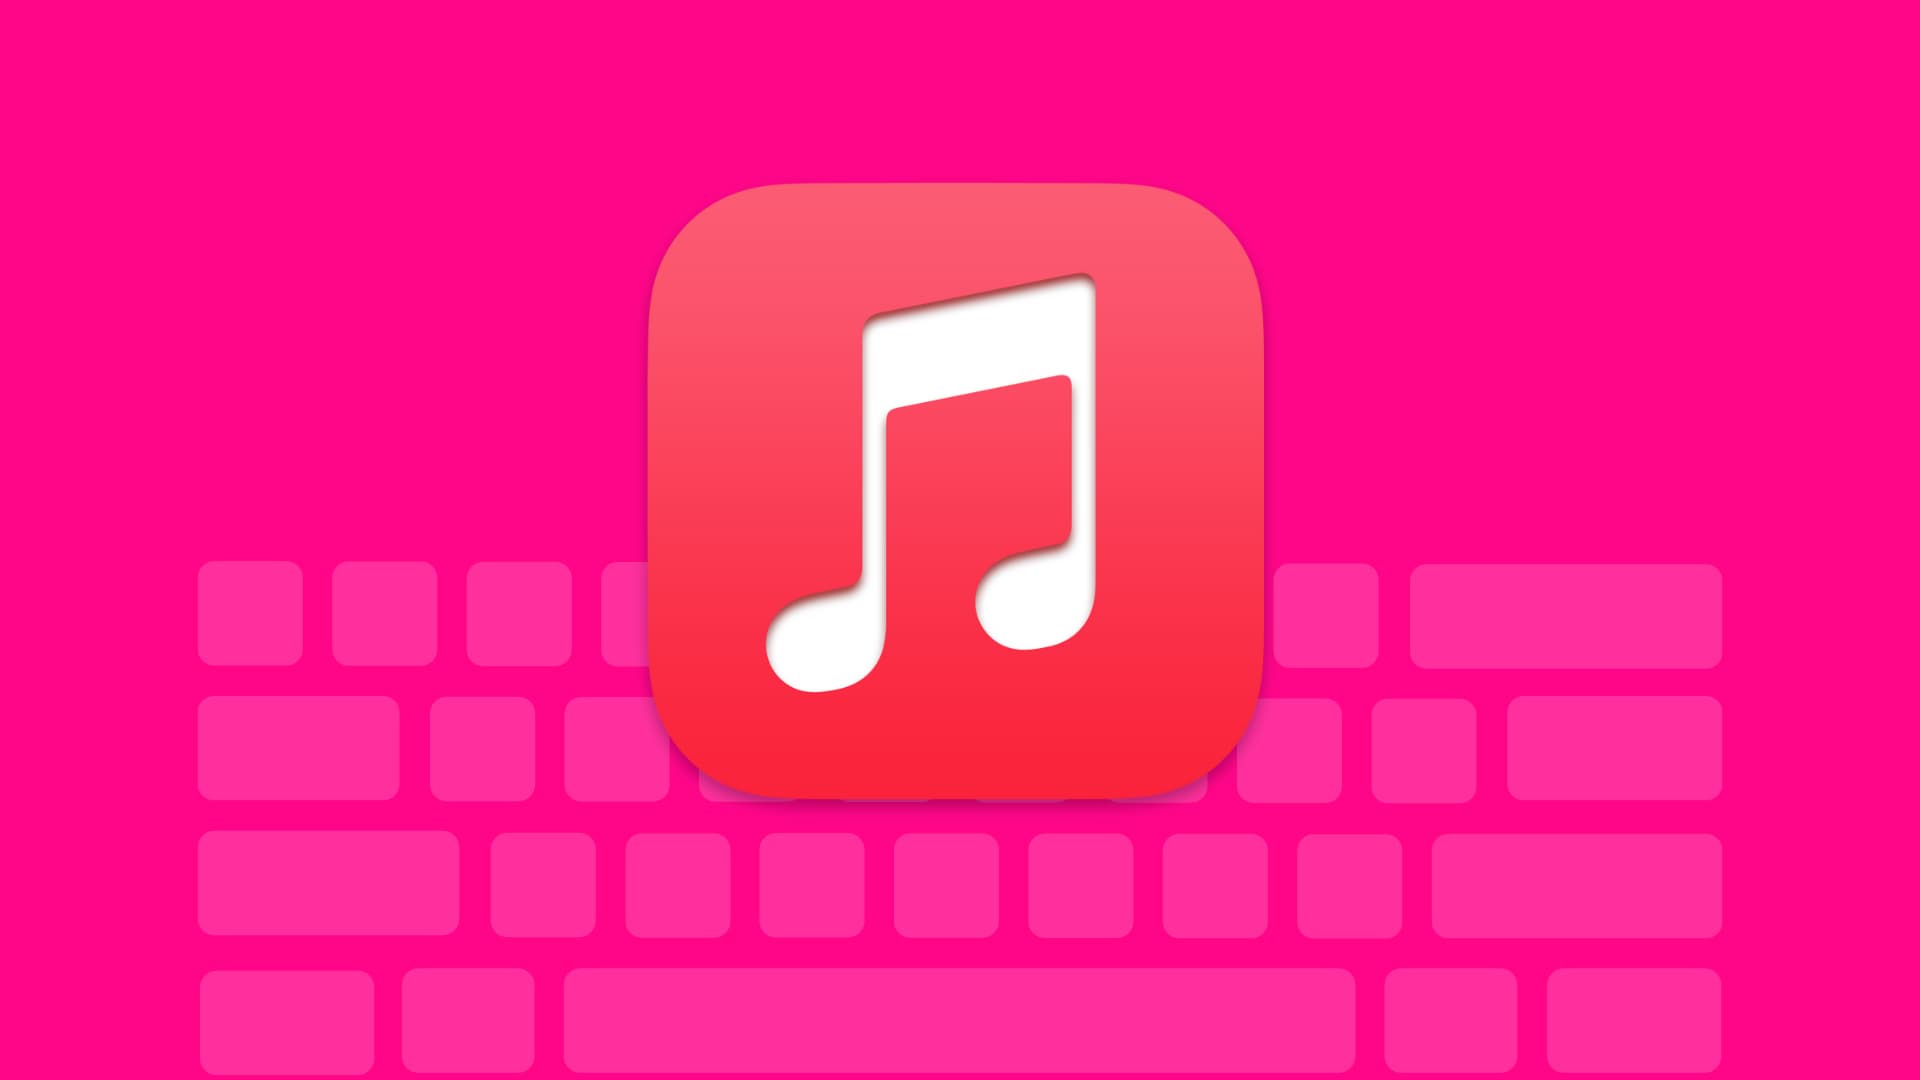 Keyboard shortcuts for the Apple Music app